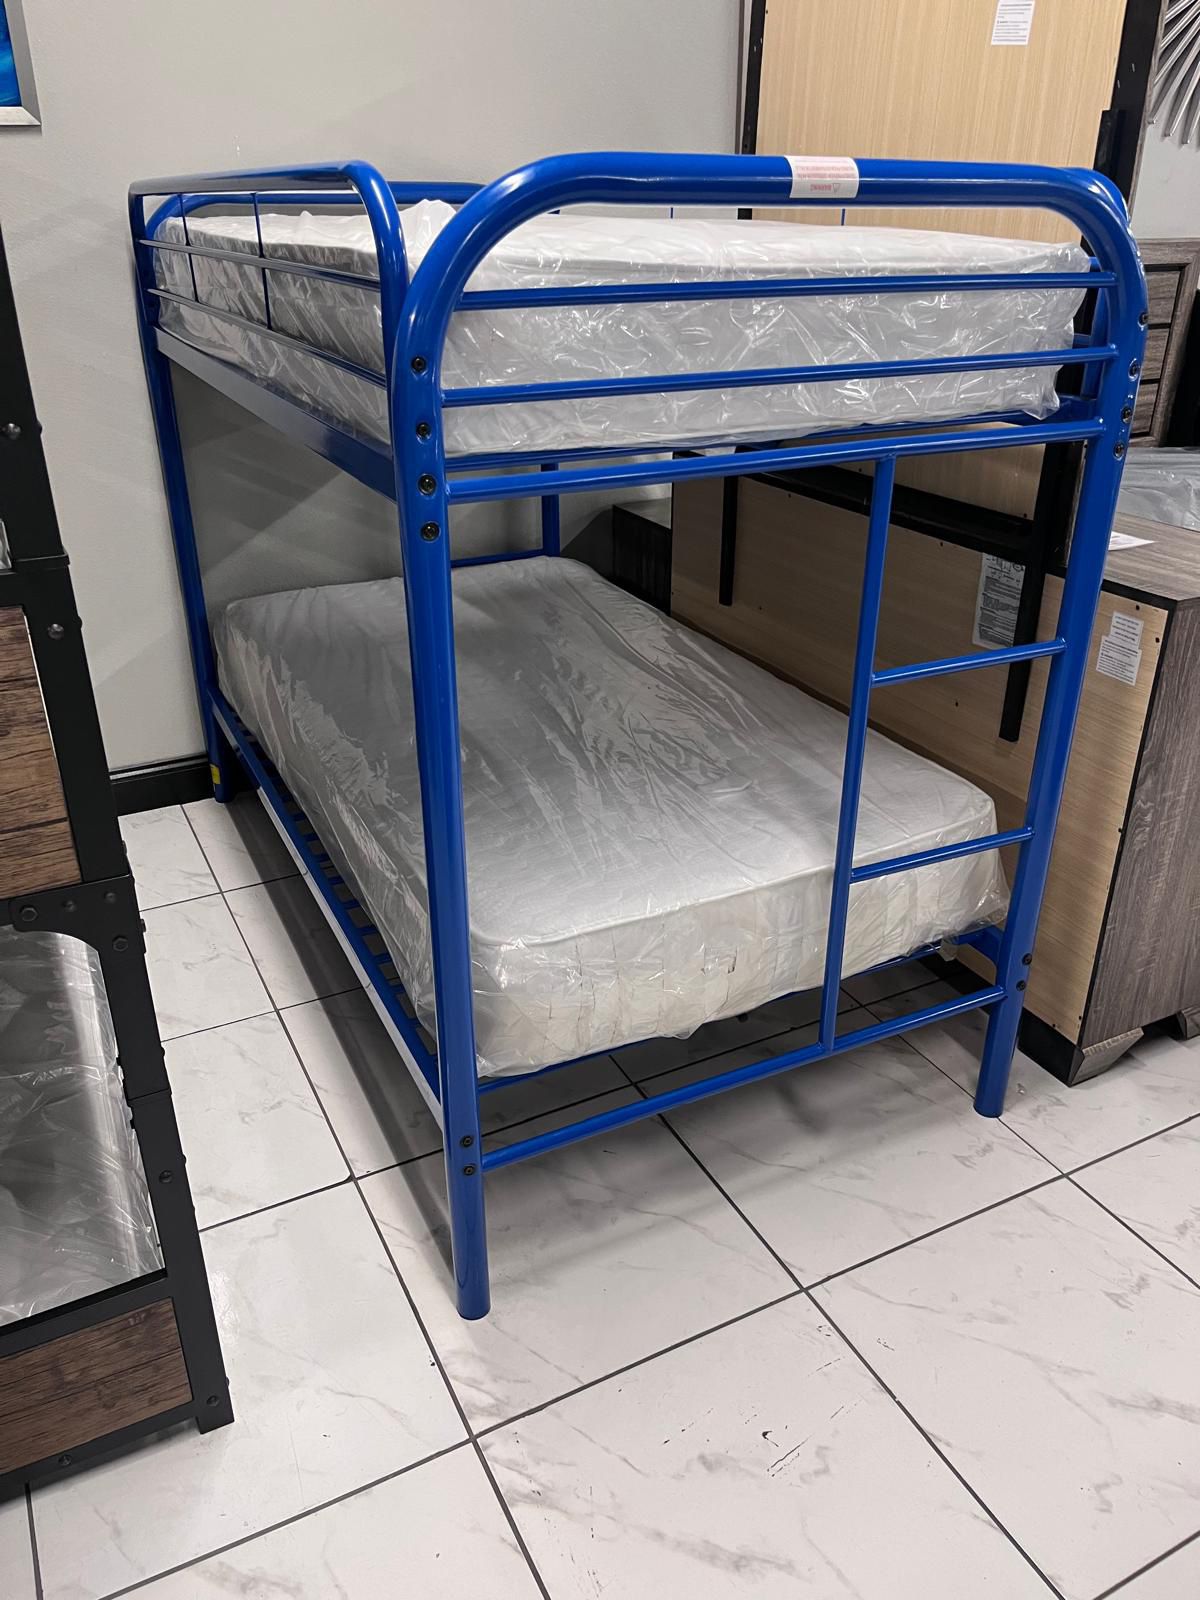 Twin/Twin Bunk Bed With Mattress 💙